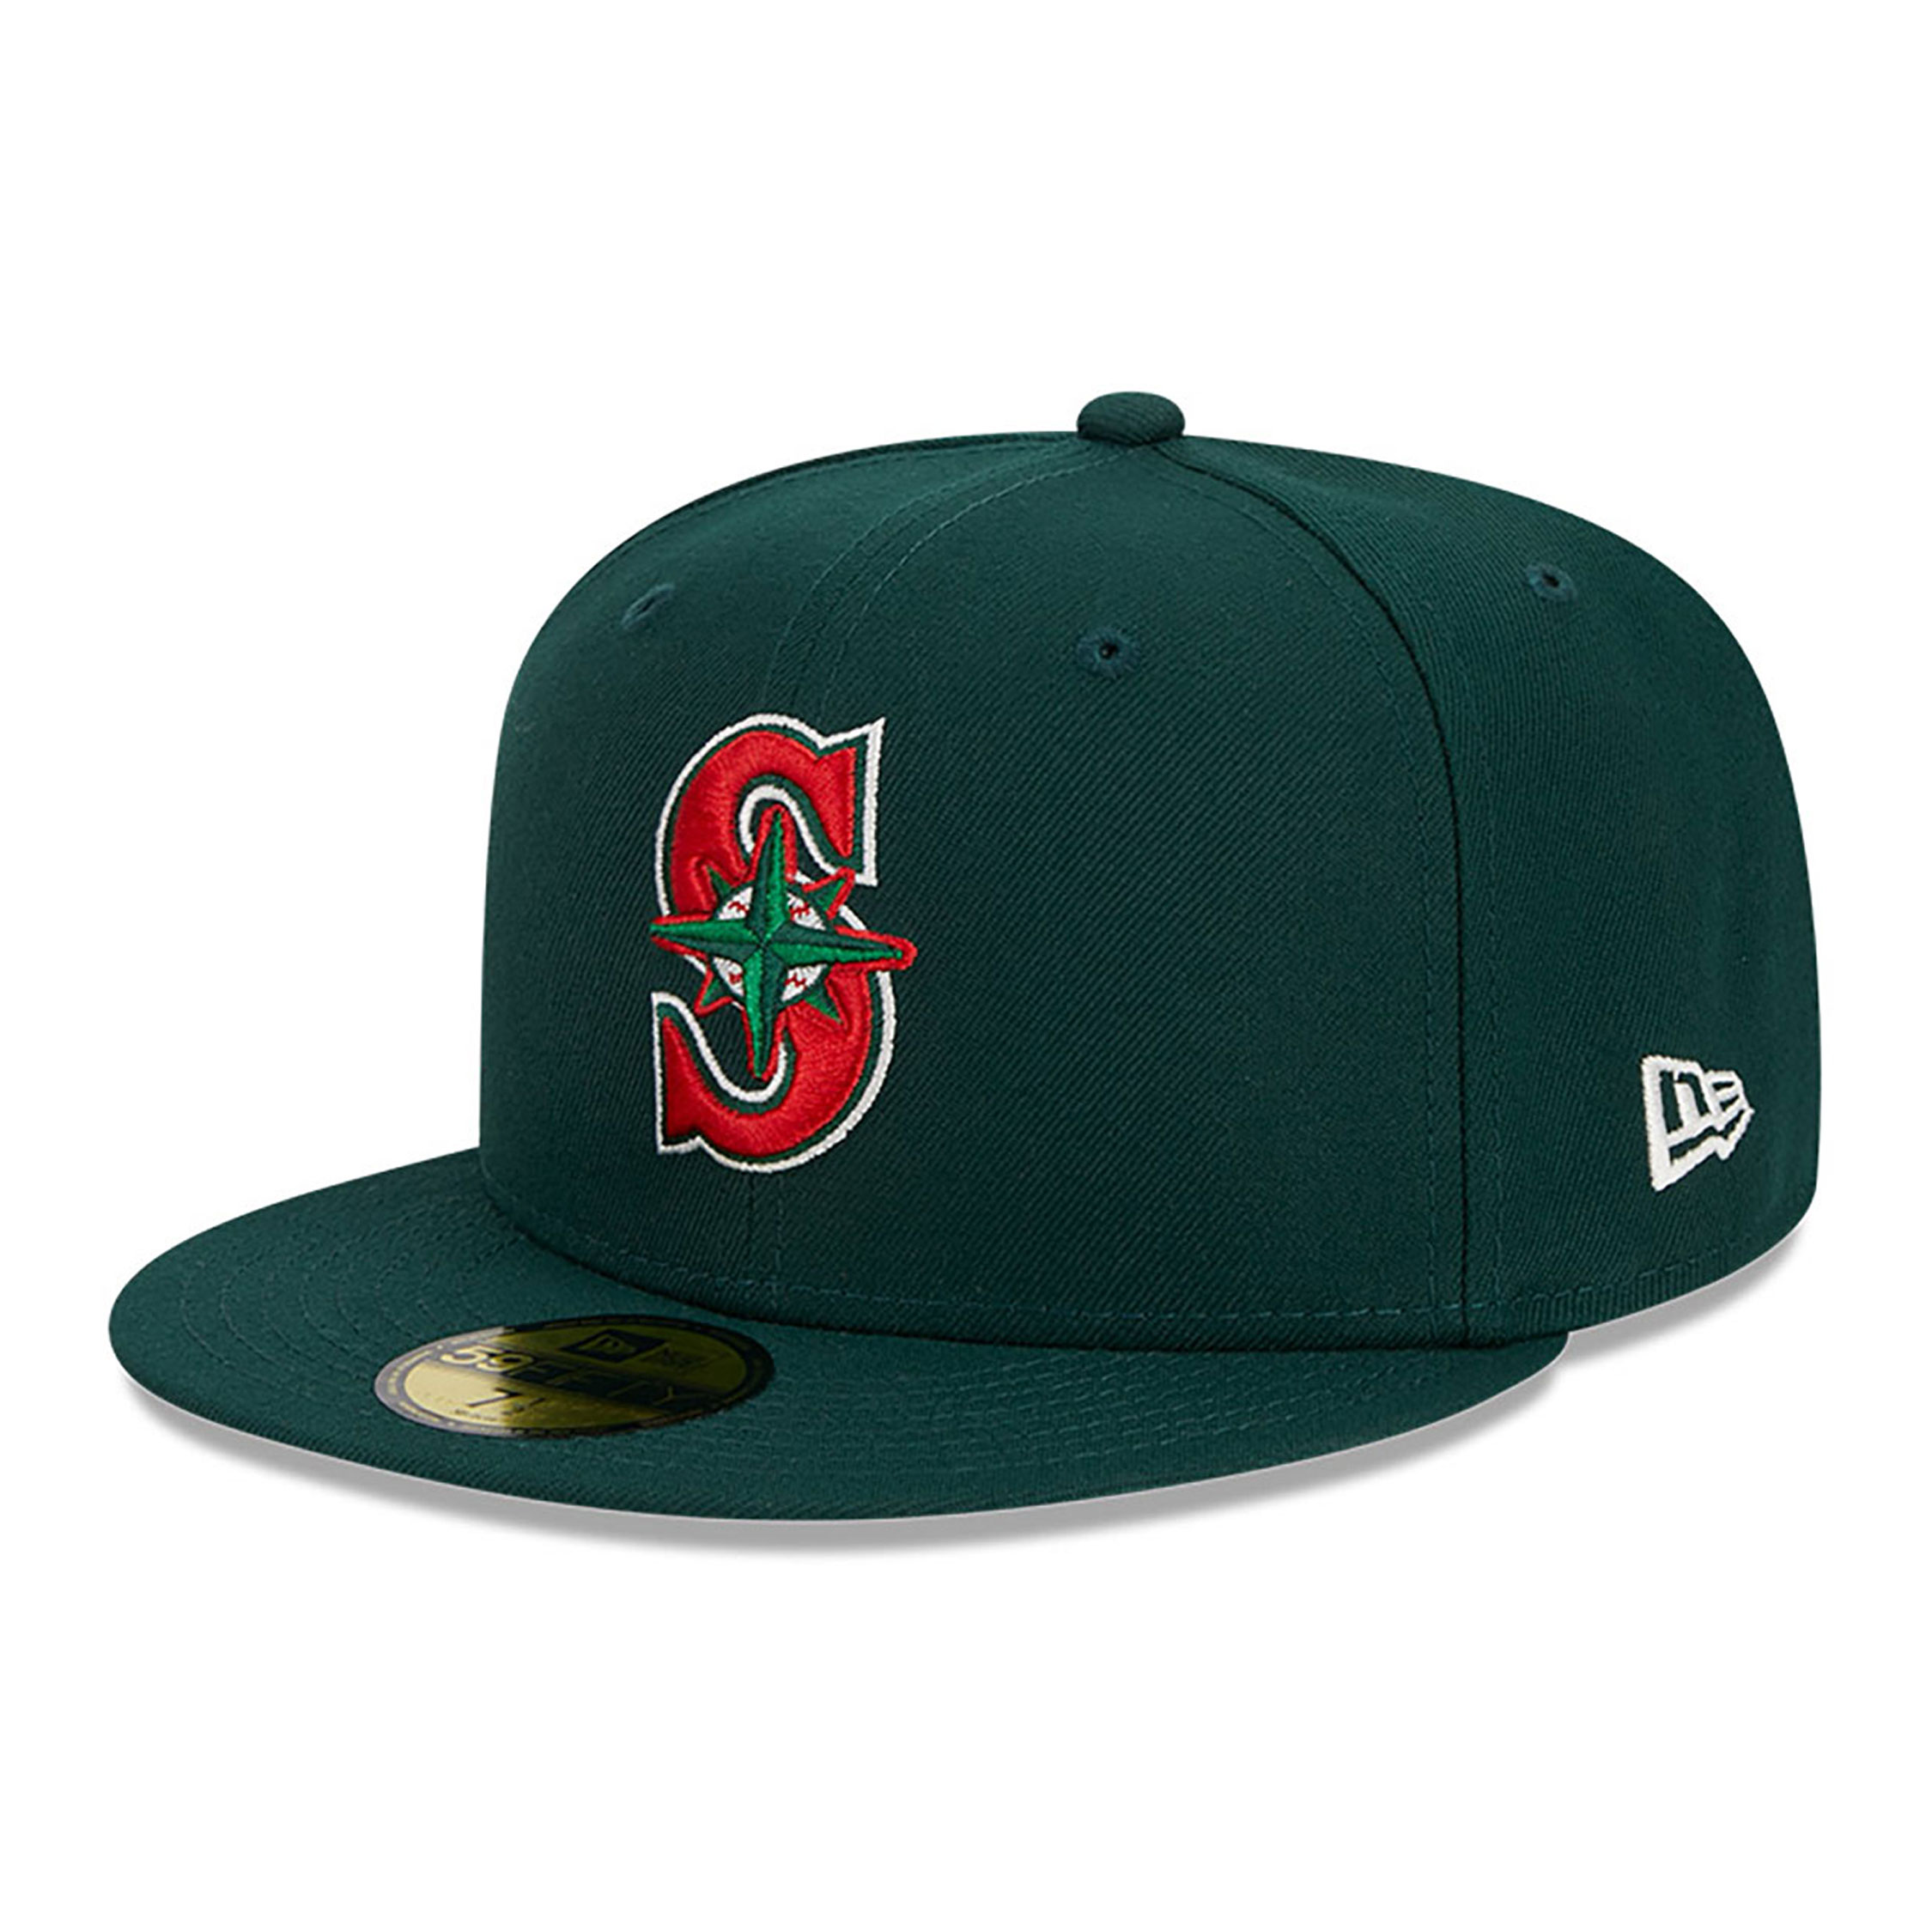 Seattle Mariners Spice Berry Dark Green 59FIFTY Fitted Cap